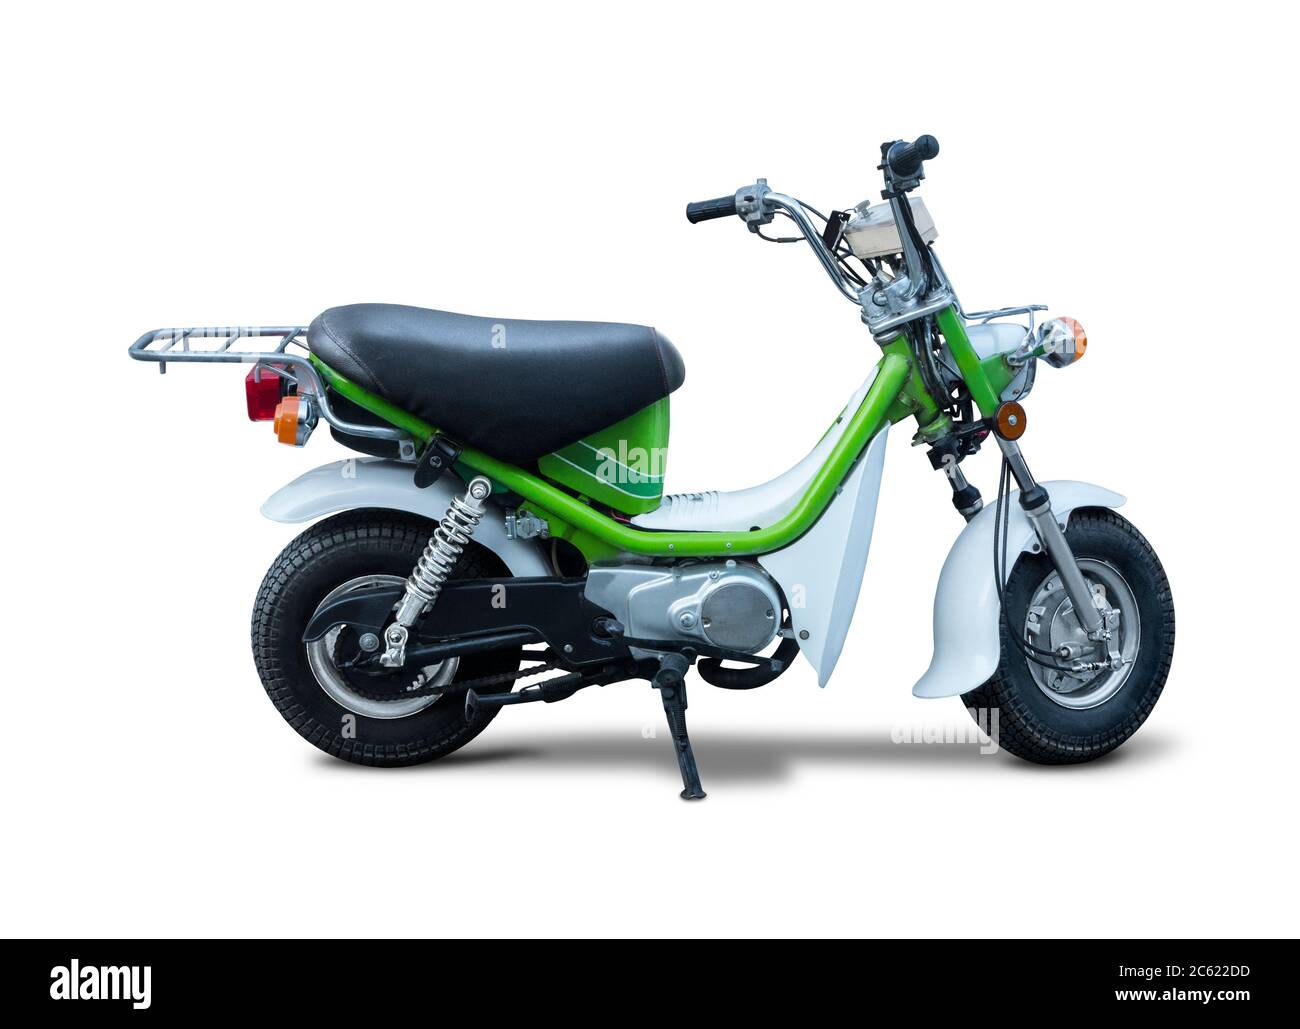 Green small Japanese Moped - Scooter Stock Photo - Alamy